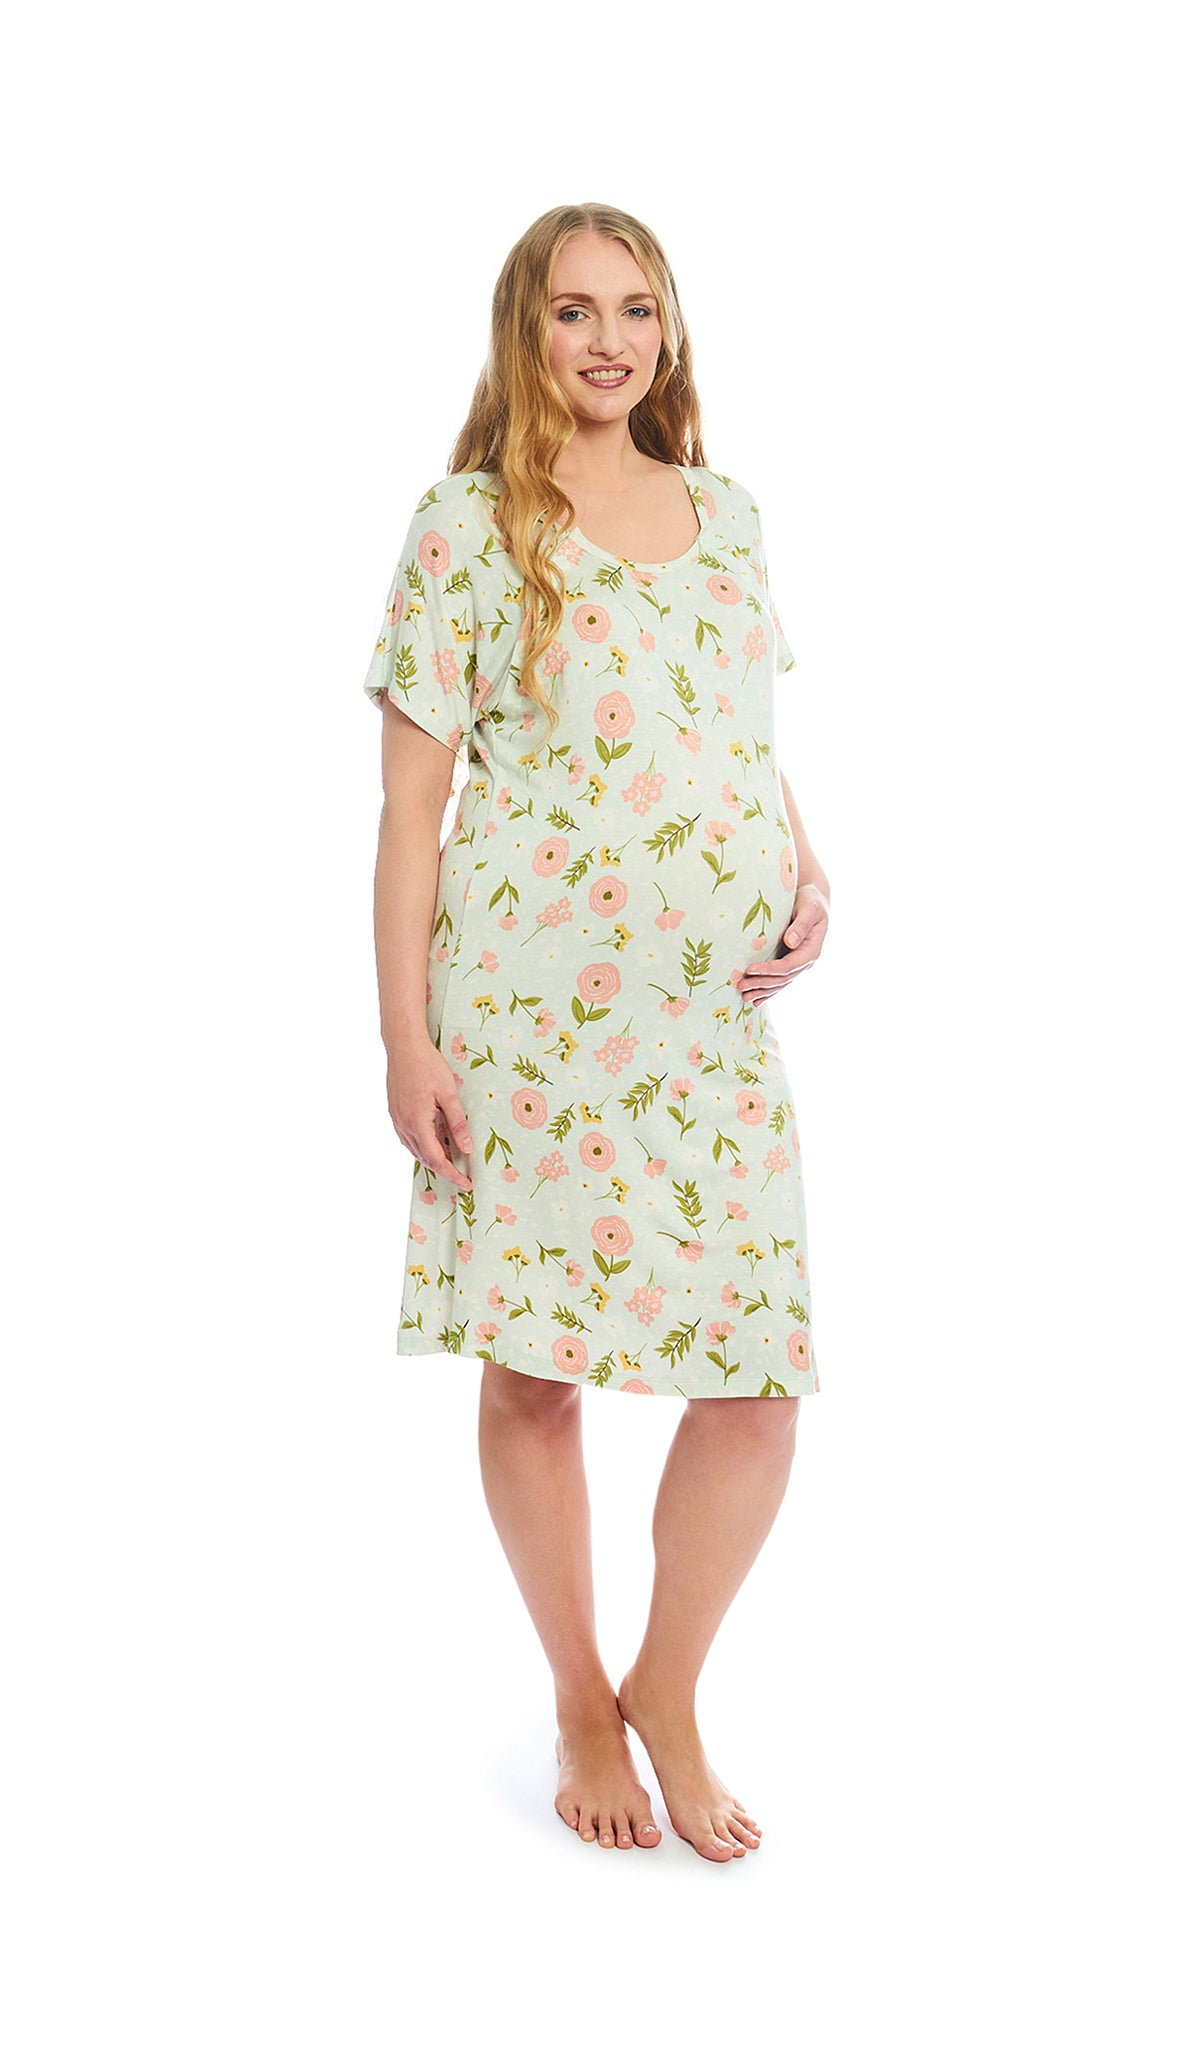 Carnation Rosa hospital gown. Pregnant woman with one hand on belly, wearing hospital gown with scoop-neckline featuring dual snap openings. 